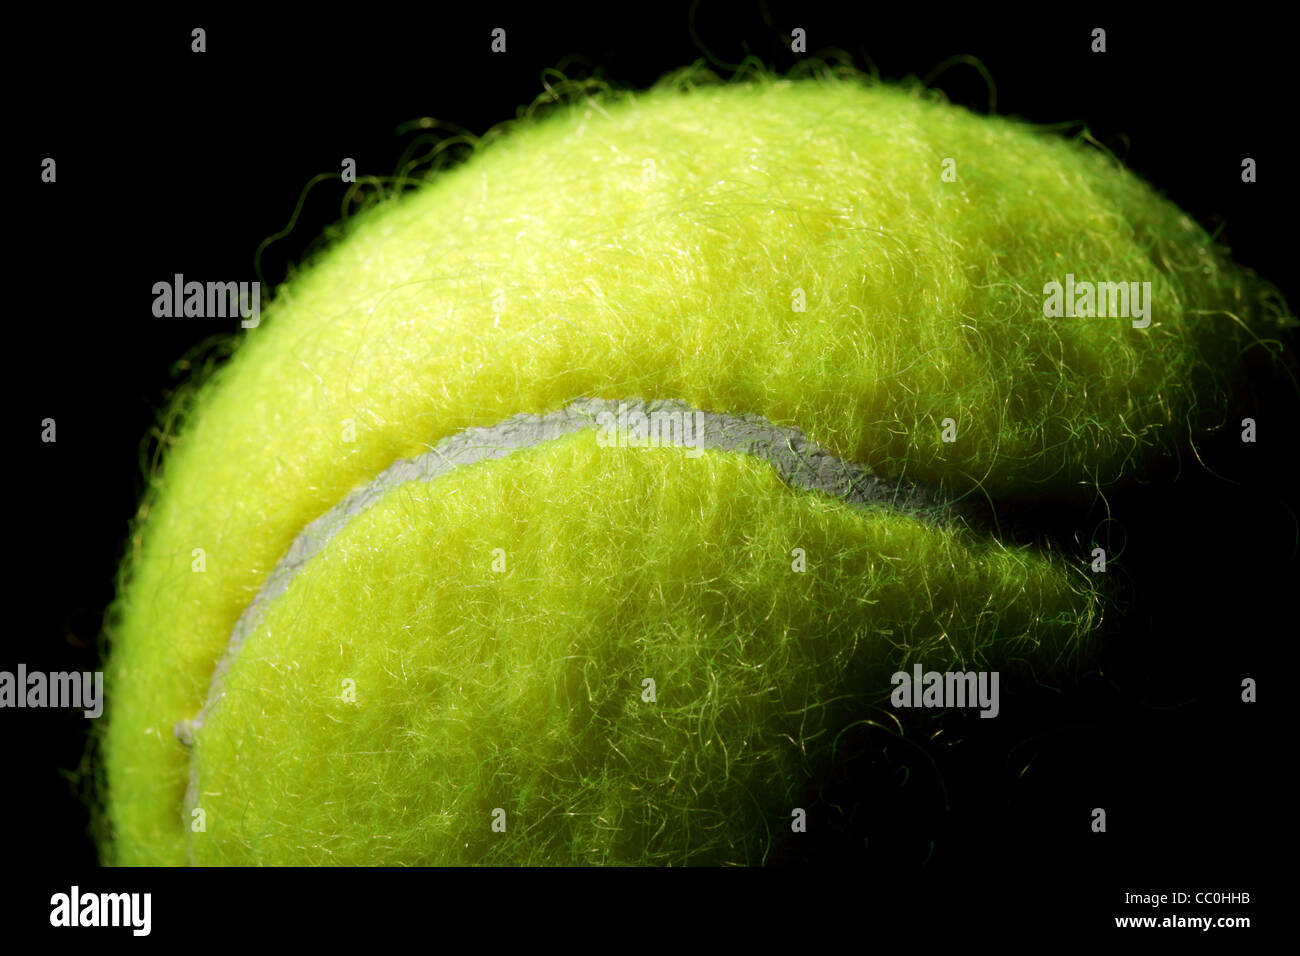 Tennis ball on a black background Stock Photo